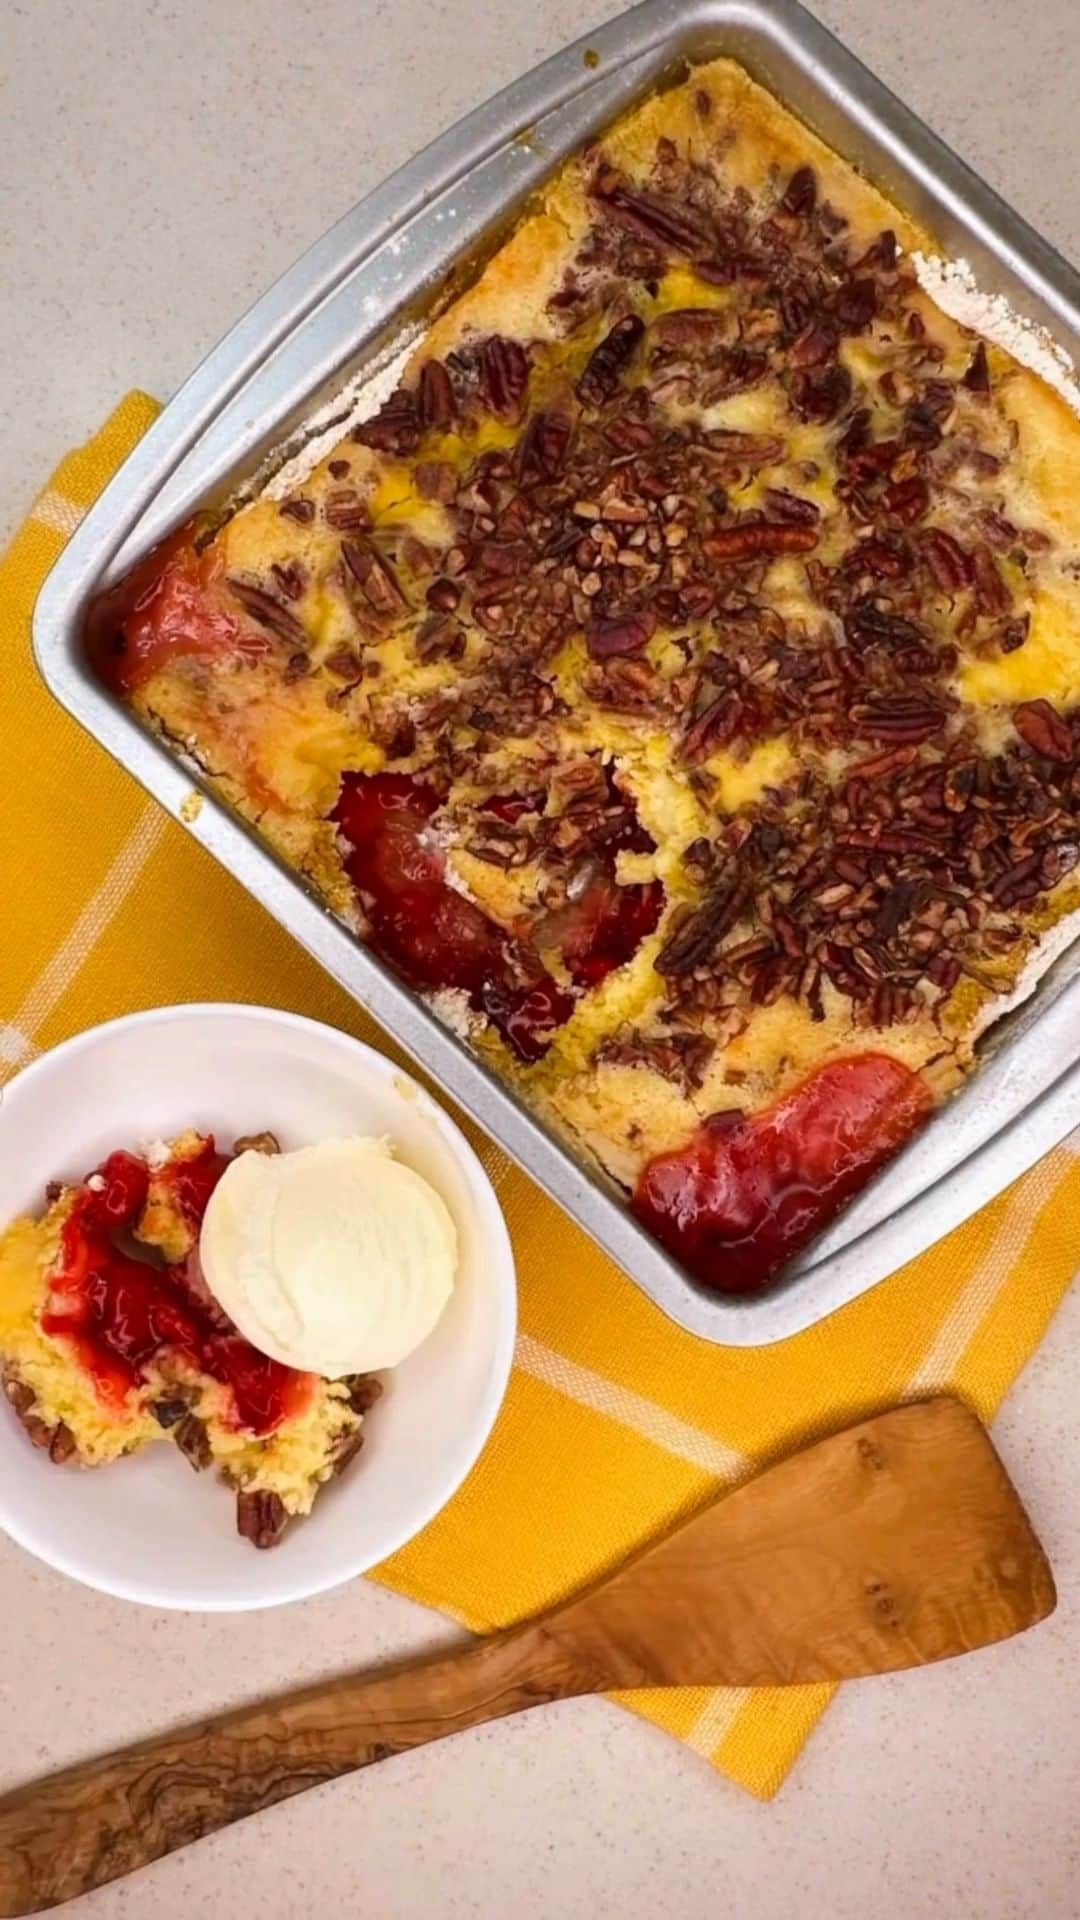 Dole Packaged Foods（ドール）のインスタグラム：「Embrace the classics with this Pineapple Cherry Dump Cake 🍍🍒 - an easy-to-make dessert that's bursting with delicious Dole® flavor! Check out the recipe below 👇   🧑‍🍳Prep: 5 min. 👥Makes: 12 servings 🔸1 package (15.25 oz.) yellow cake mix 🔸 1 can (20-oz.) DOLE® Crushed Pineapple, Undrained 🔸 1 can (21-oz.) cherry pie filling 🔸 3/4 cup salted butter, cut into thin slices (1 1/2 sticks) 🔸 1 cup chopped pecans   🔹 Preheat oven to at 350°F.  Grease a 13x9 inch cake pan or baking dish with butter or non-stick spray. 🔹 Add undrained pineapple to the pan and spread evenly with spatula.  Add cherry pie filling and spread evenly over the pineapple.  Add dry cake mix to the top of the fruit layers and spread gently and evenly. 🔹 Place squares of butter over the cake mix layer and sprinkle with chopped pecans. 🔹 Bake for approximately 50 minutes or until the top is golden brown and edges are bubbly.  Serve warm with vanilla ice cream or frozen yogurt.  #DoleRecipe #Recipes #DesserRecipe #EasyRecipes #PineappleCherryDumpCake」